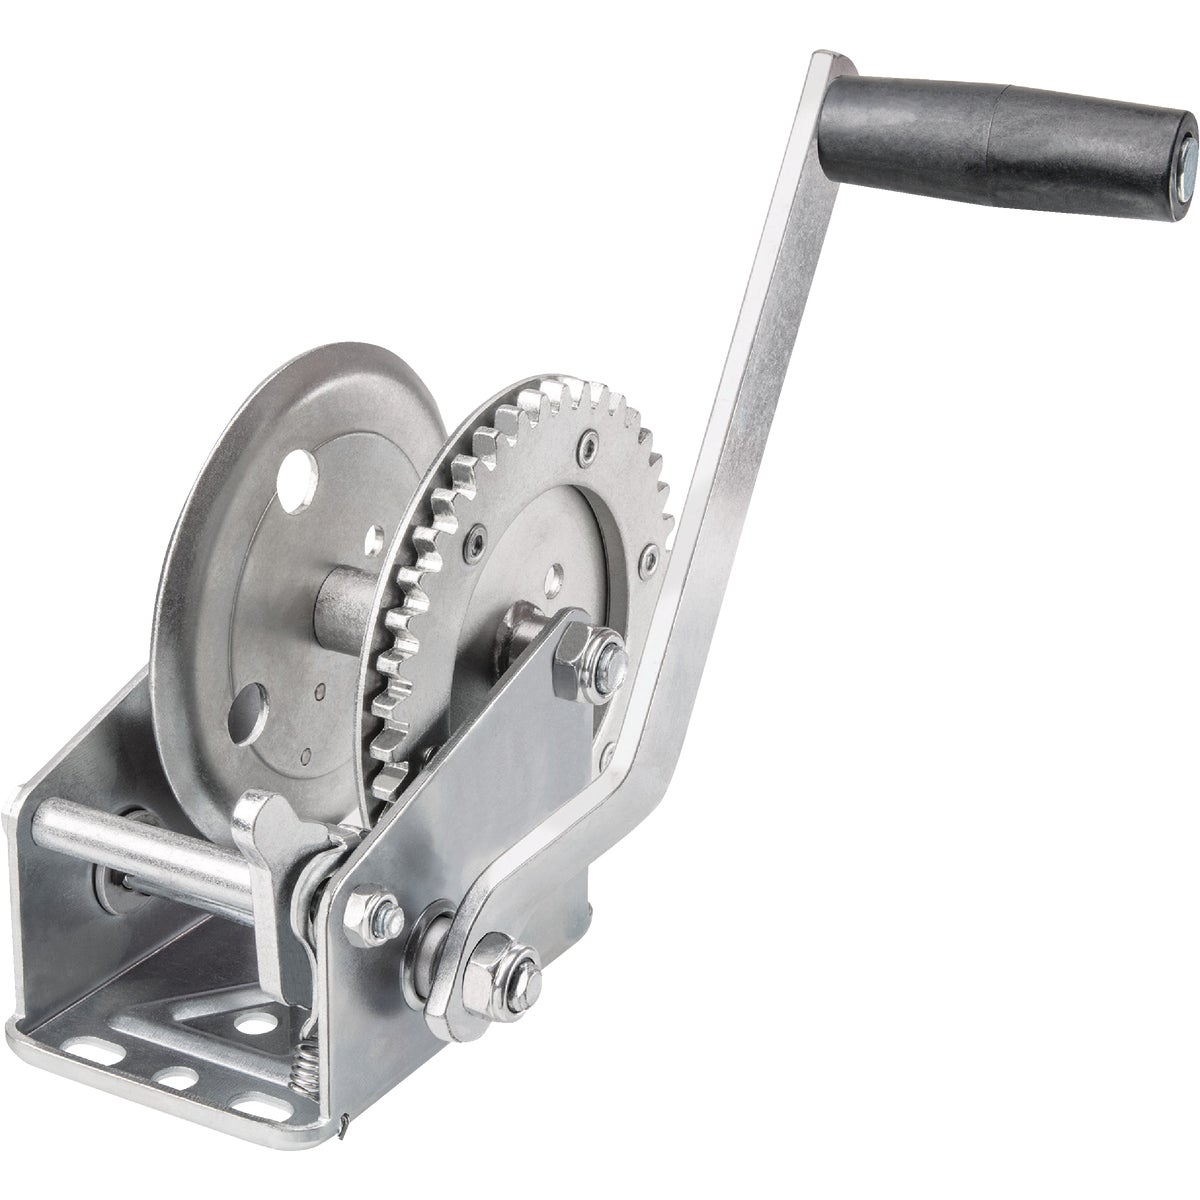 Reese Towpower 1100 Lb. Single-Speed Hand Winch